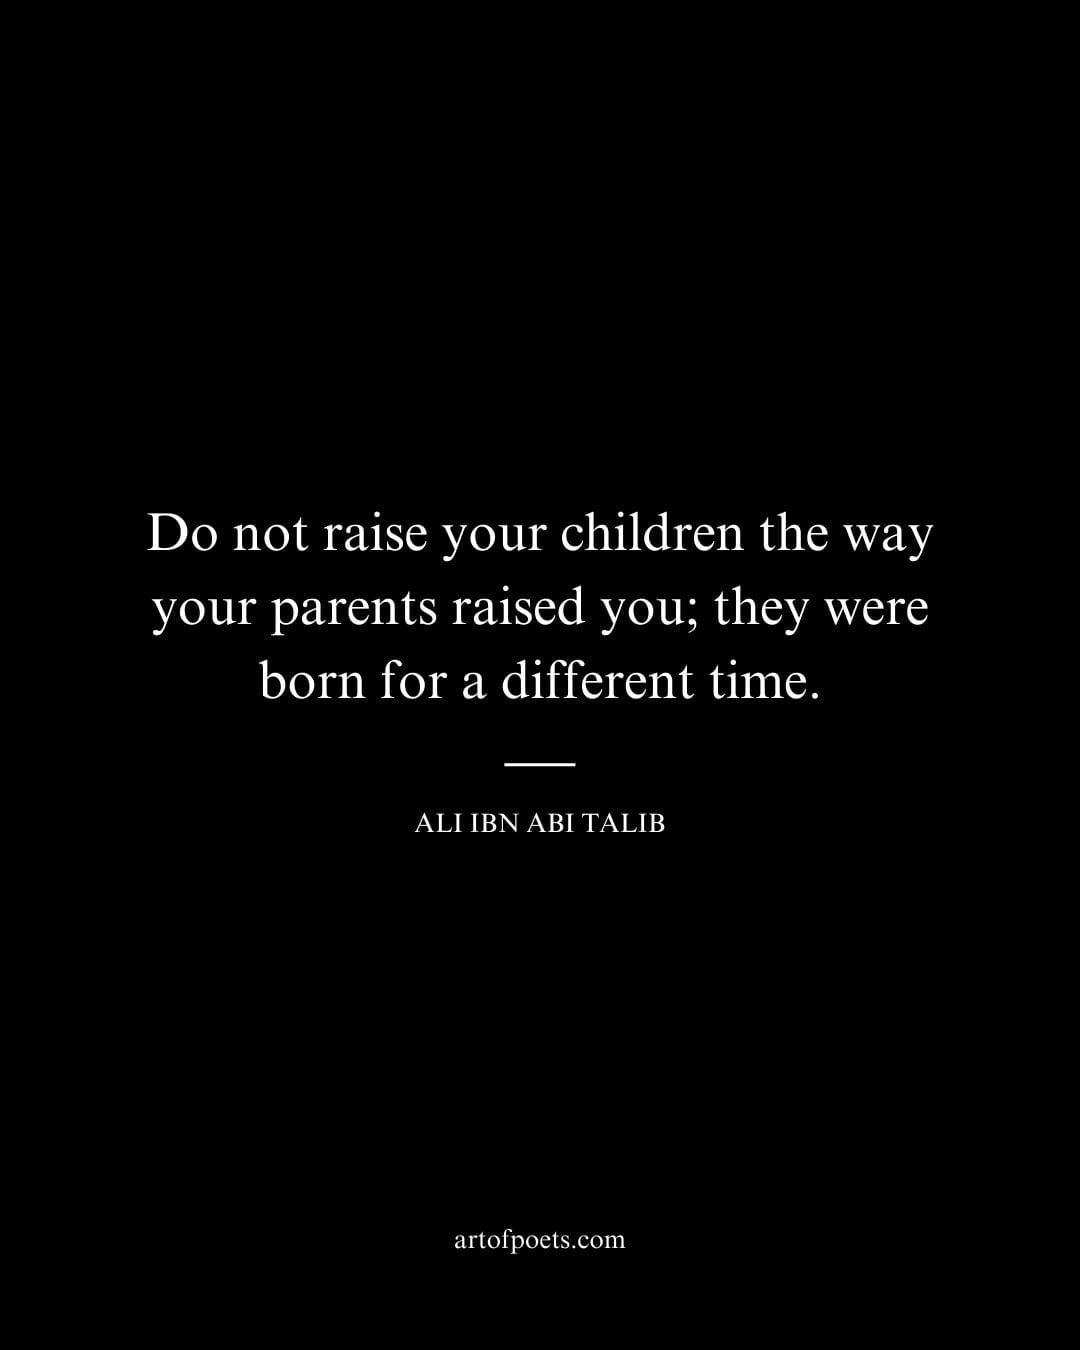 Do not raise your children the way your parents raised you they were born for a different time